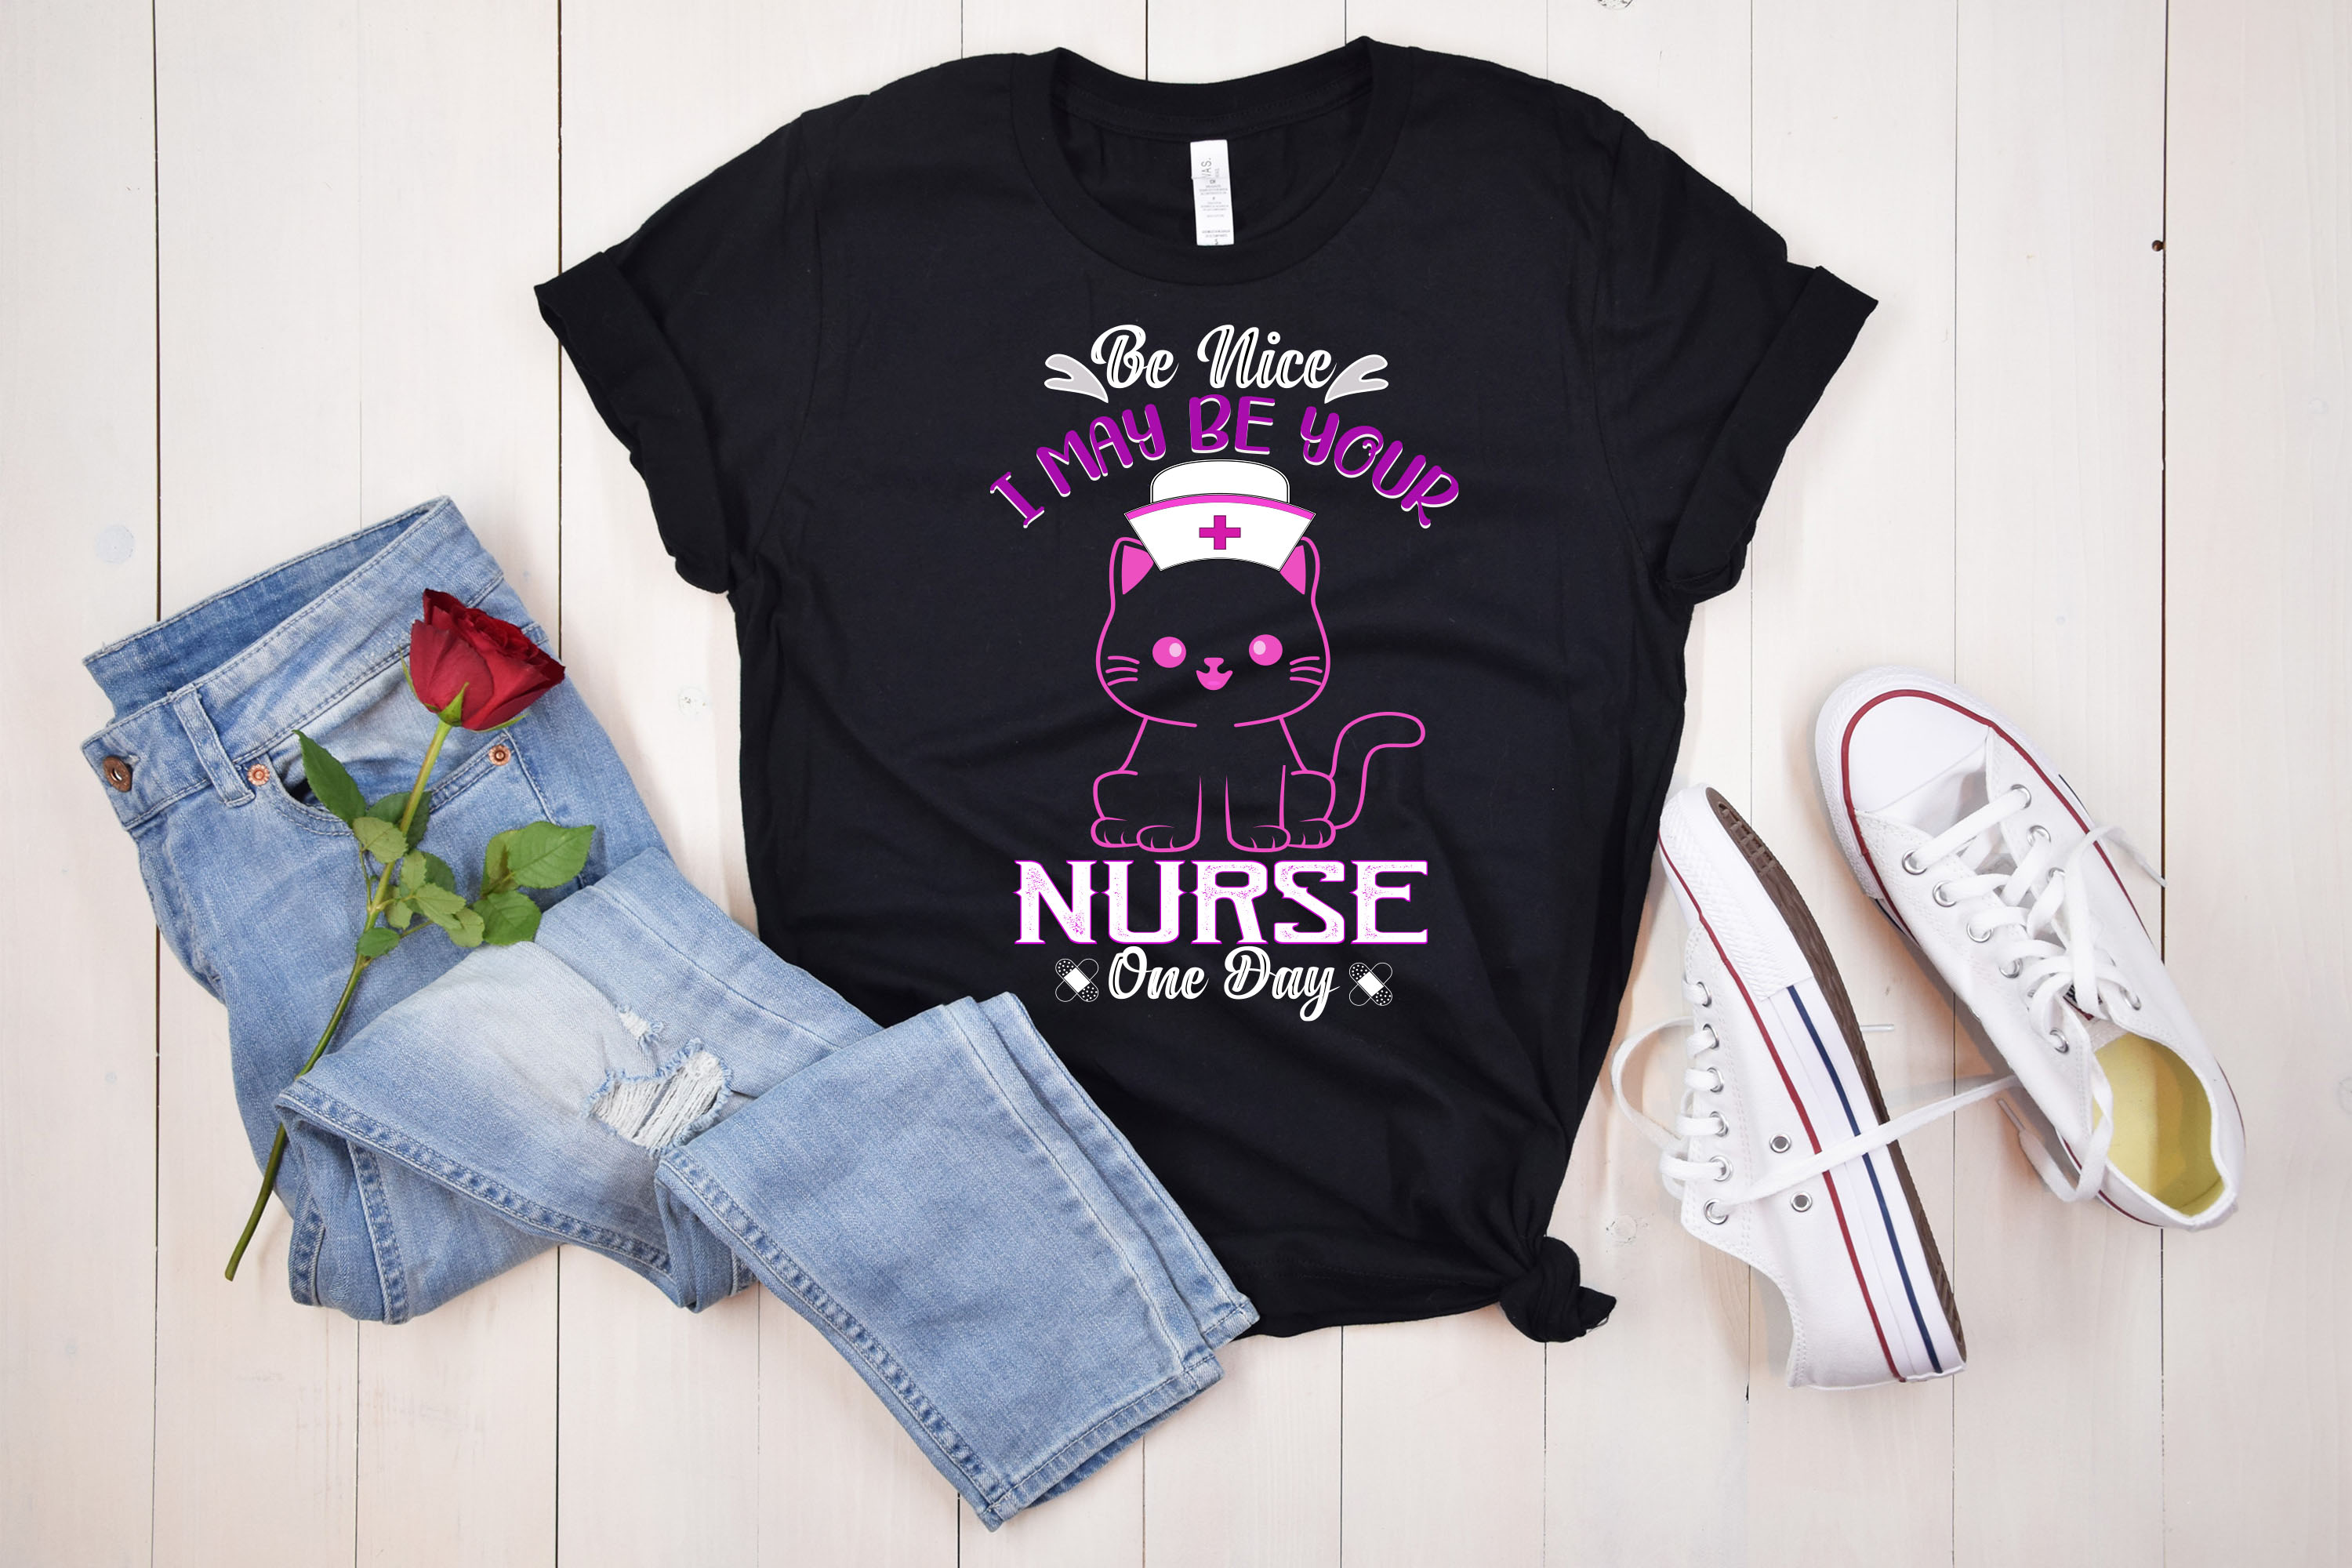 Picture of a t-shirt with a wonderful nurse theme print